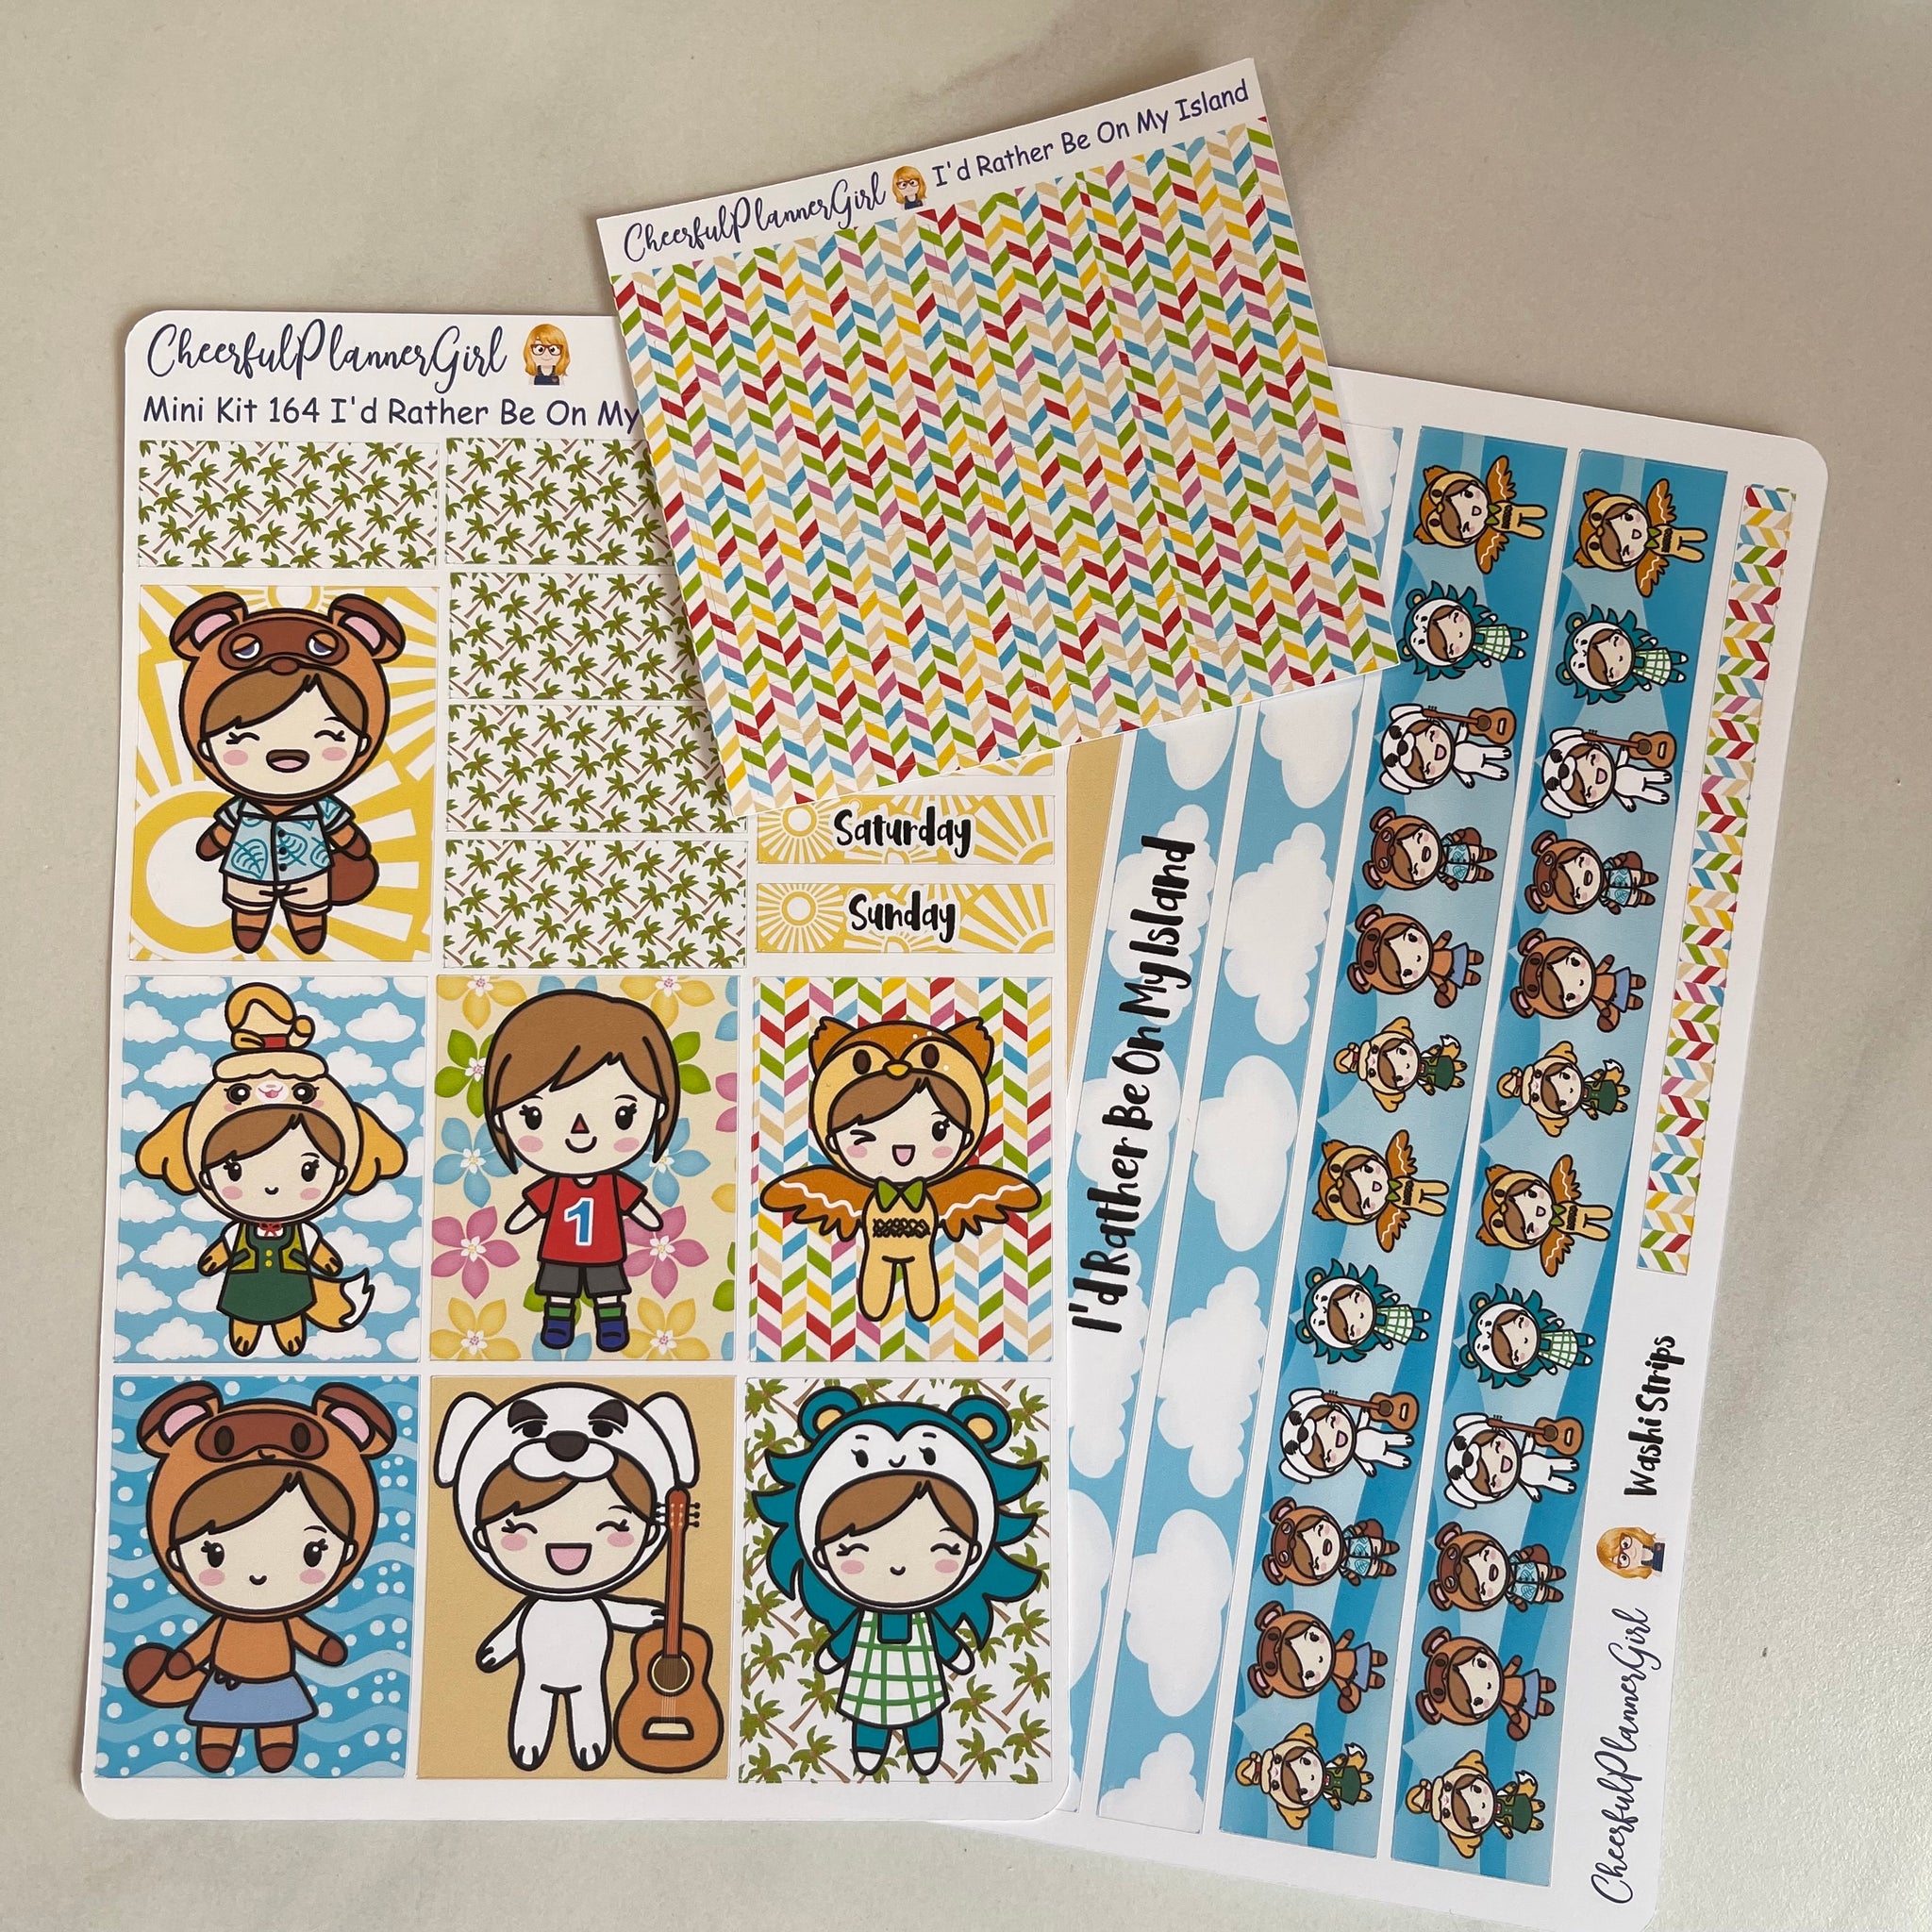 I’d Rather Be On My Island Mini Kit Weekly Layout Planner Stickers